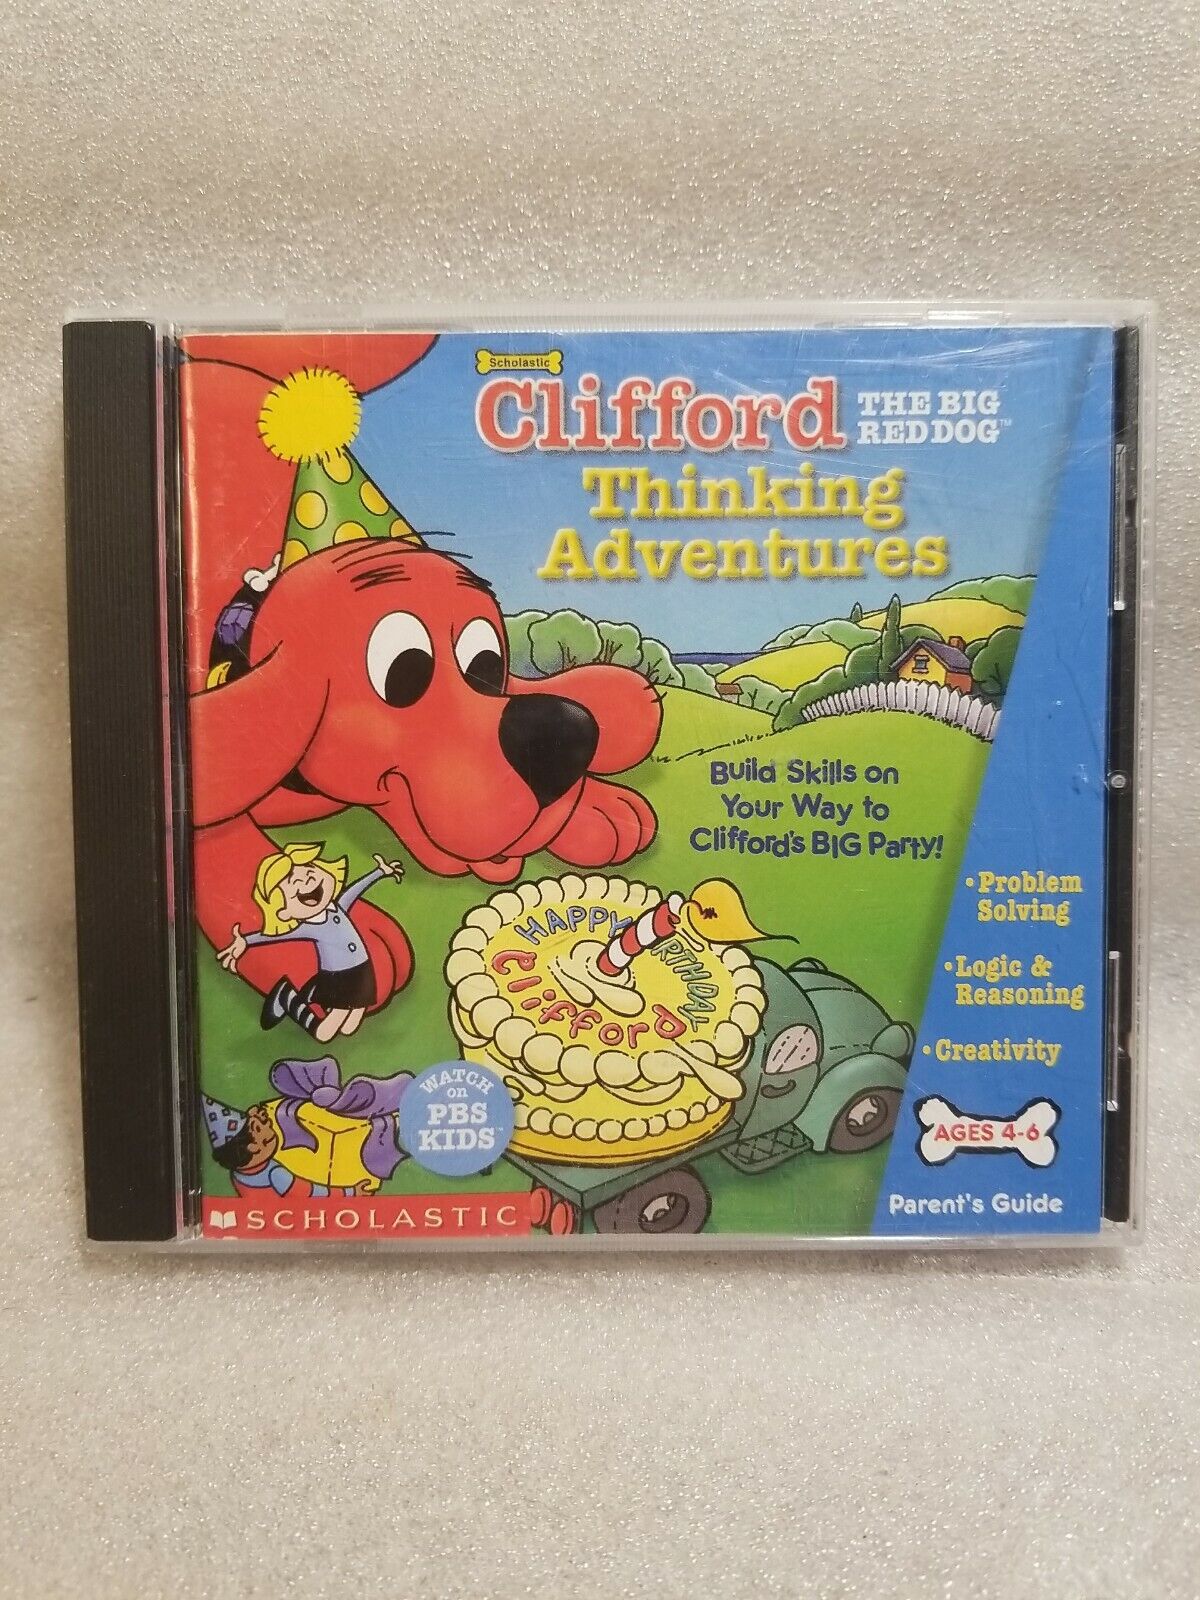 Clifford The Big Red Dog Thinking Adventures Scholastic CD-ROM Educational 